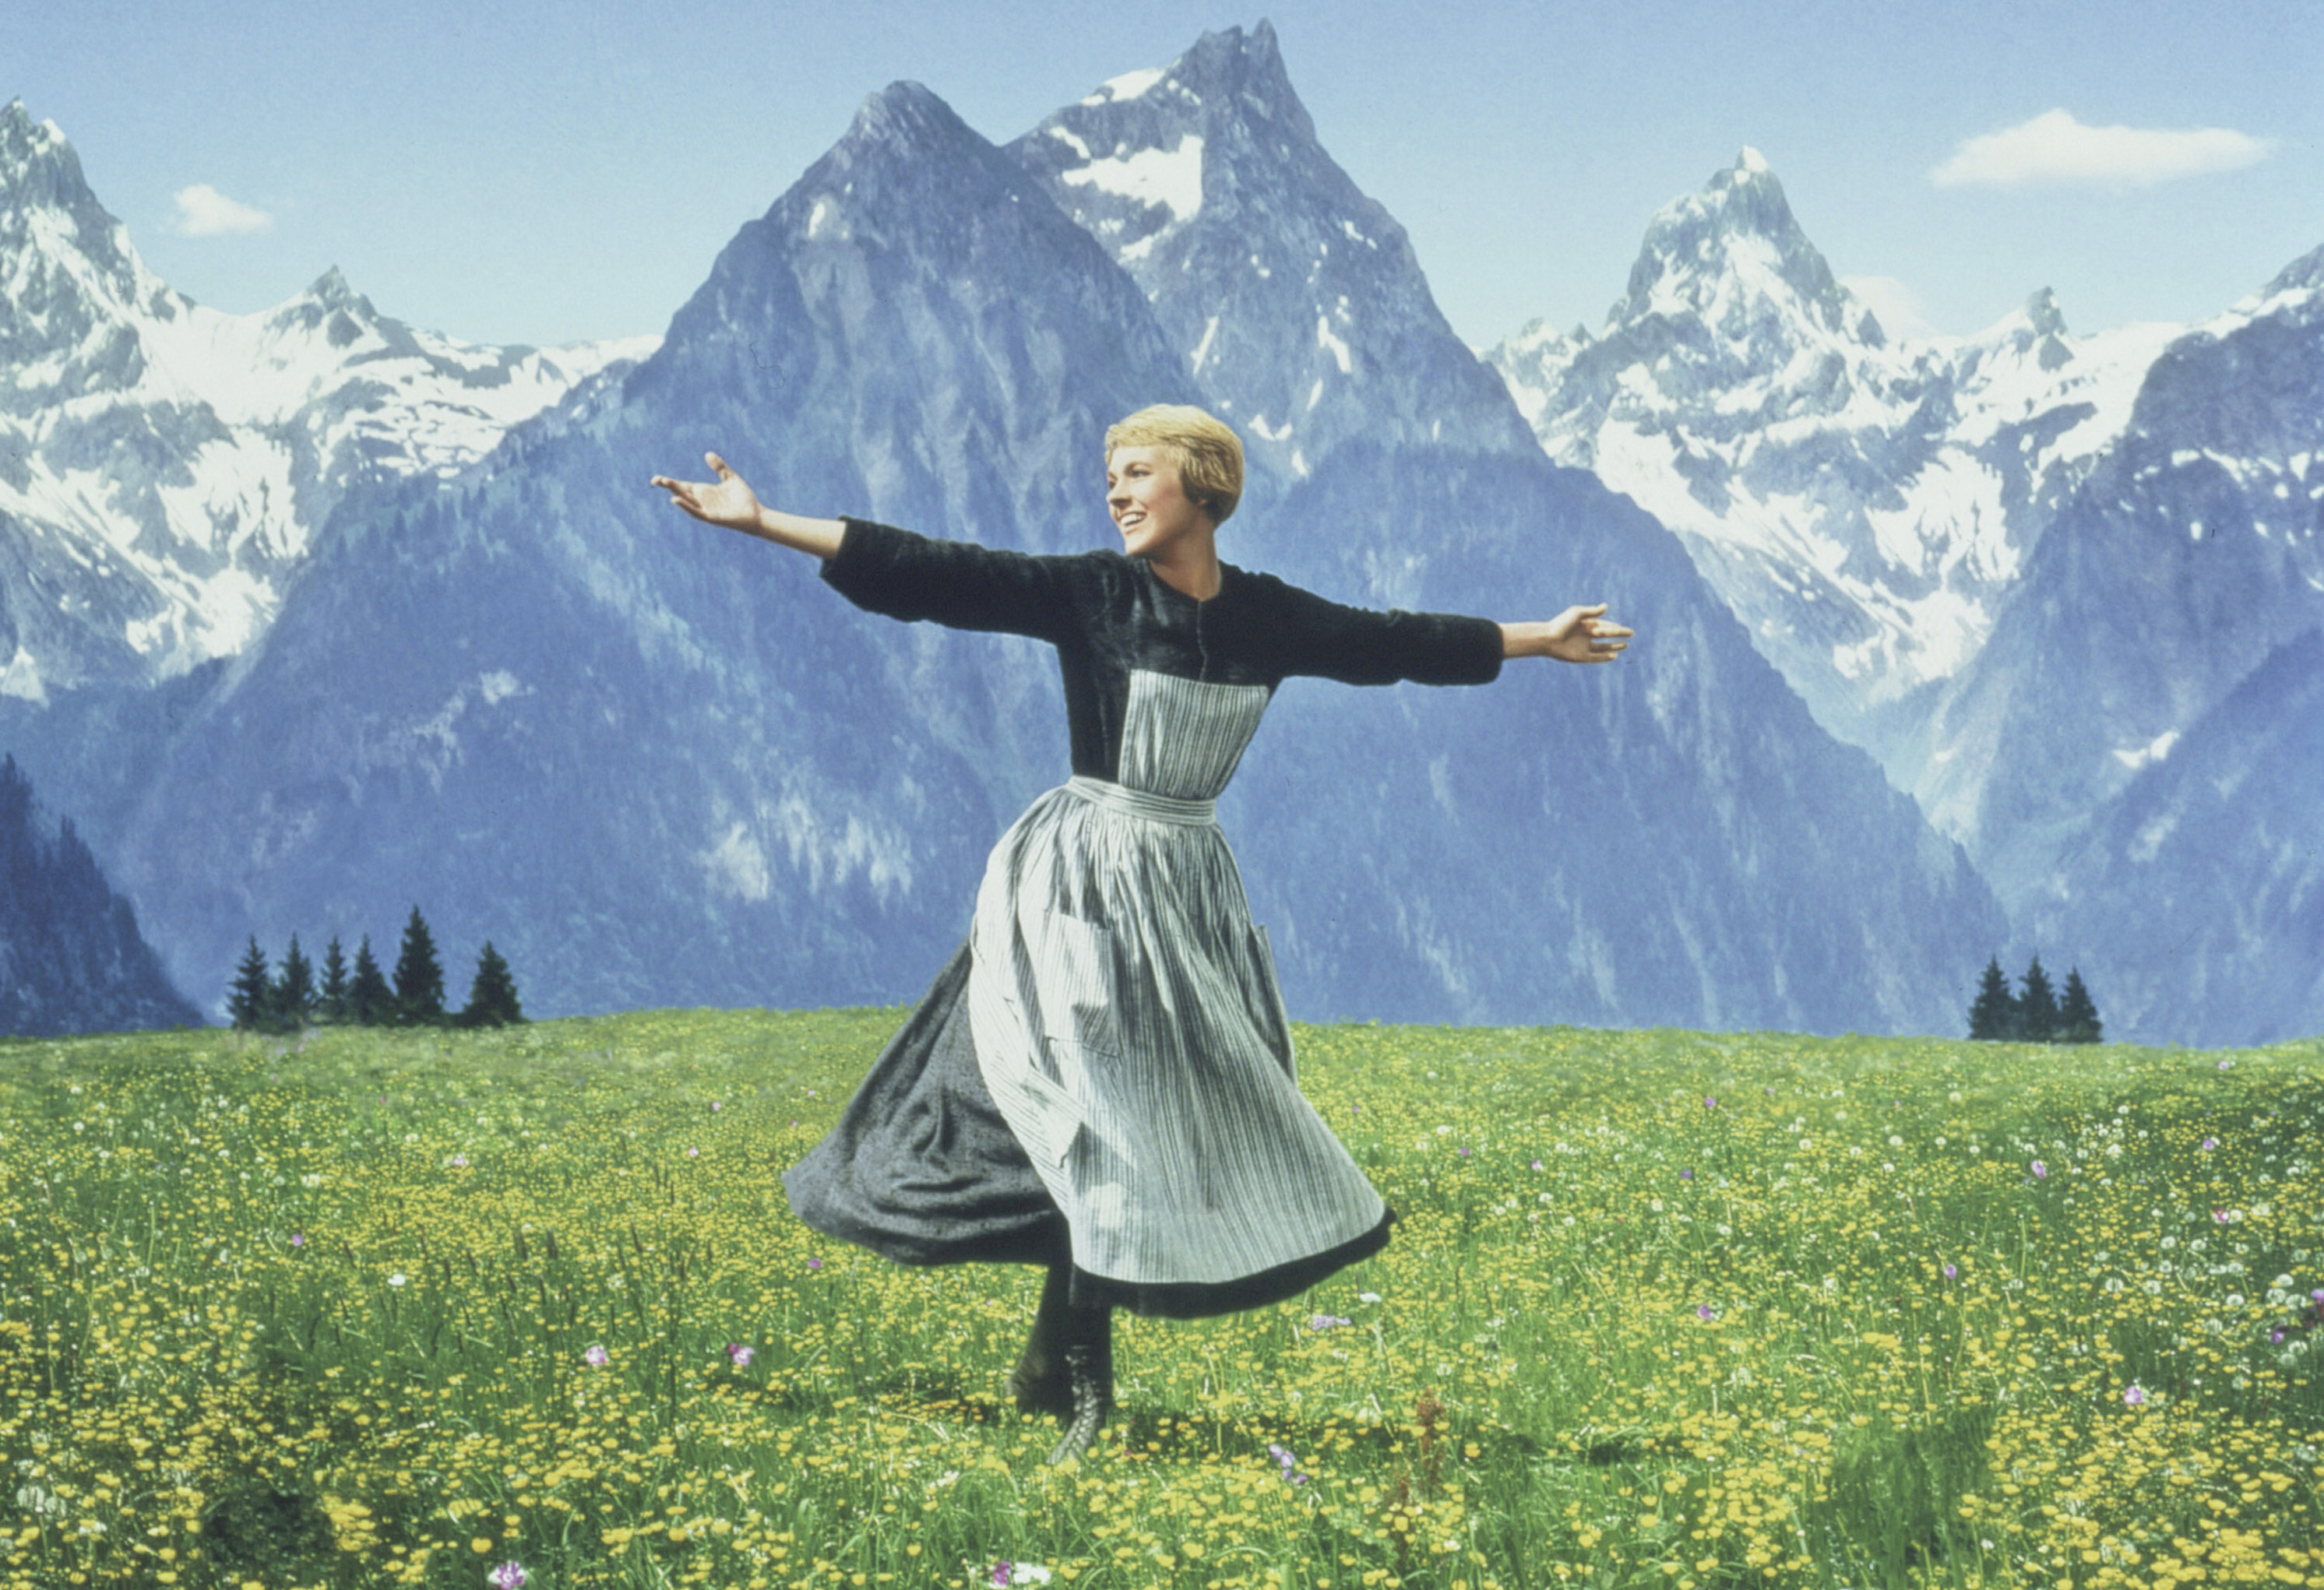 High Resolution Wallpaper | The Sound Of Music 2984x2042 px